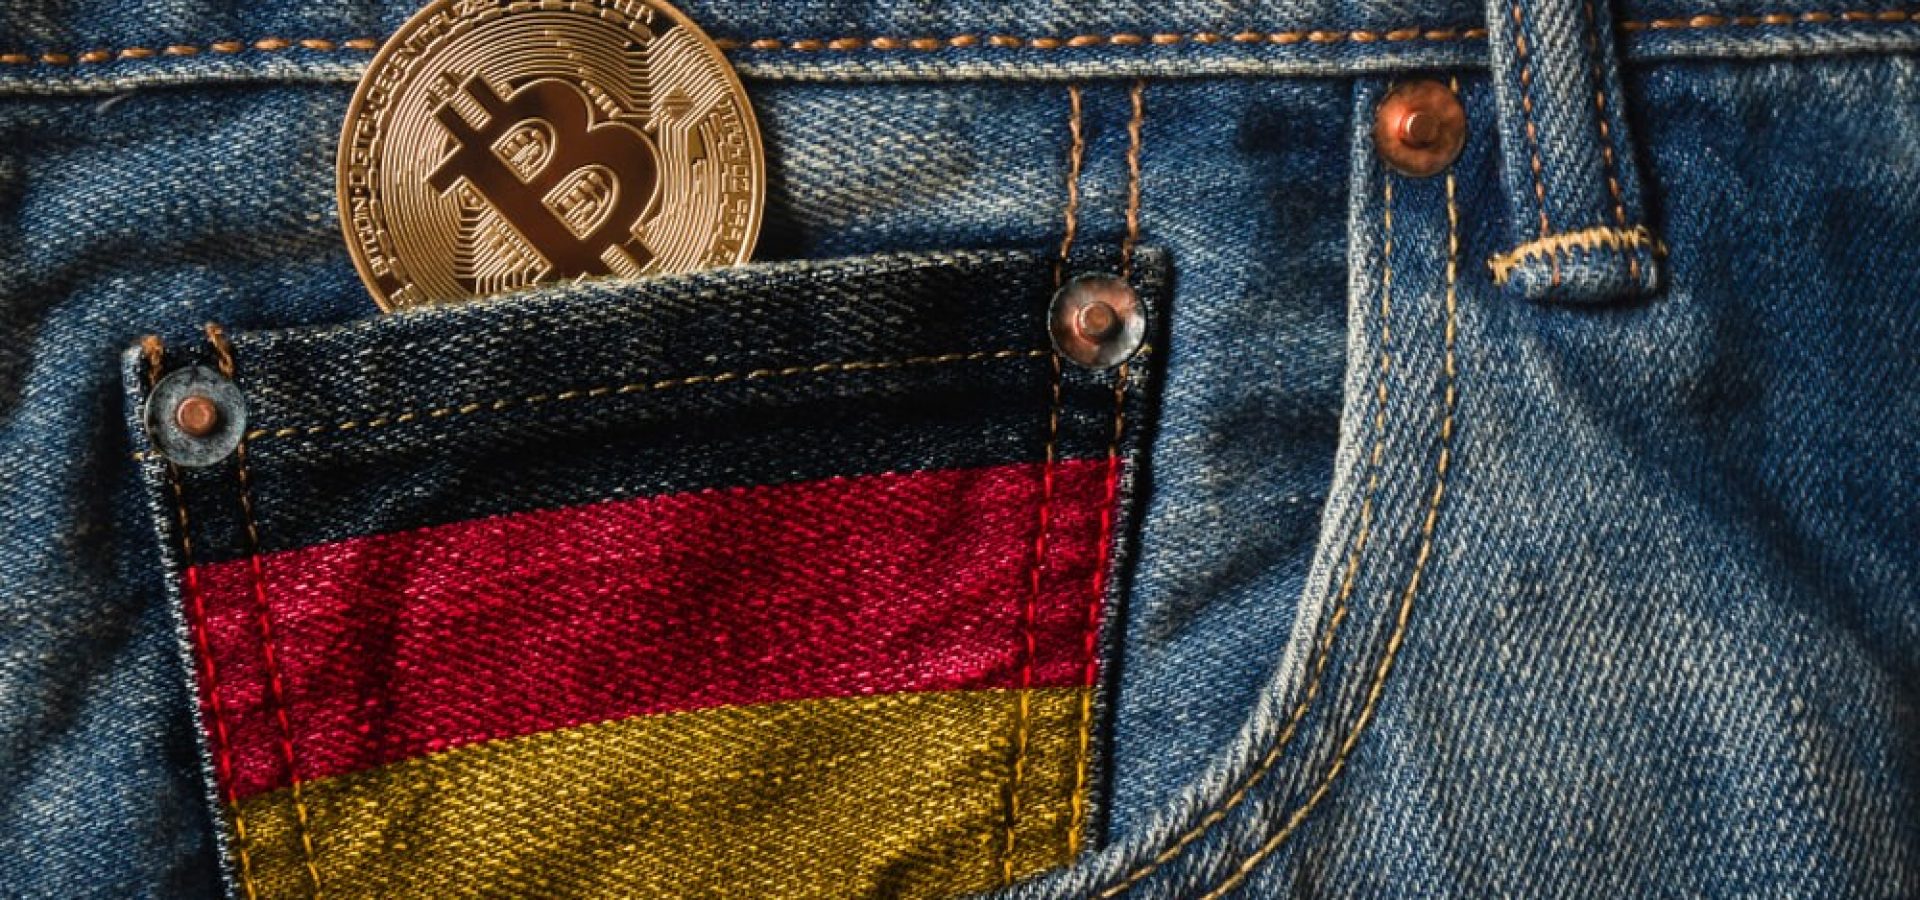 German: Golden BITCOIN (BTC) cryptocurrency in the pocket of jeans with the flag of Germany